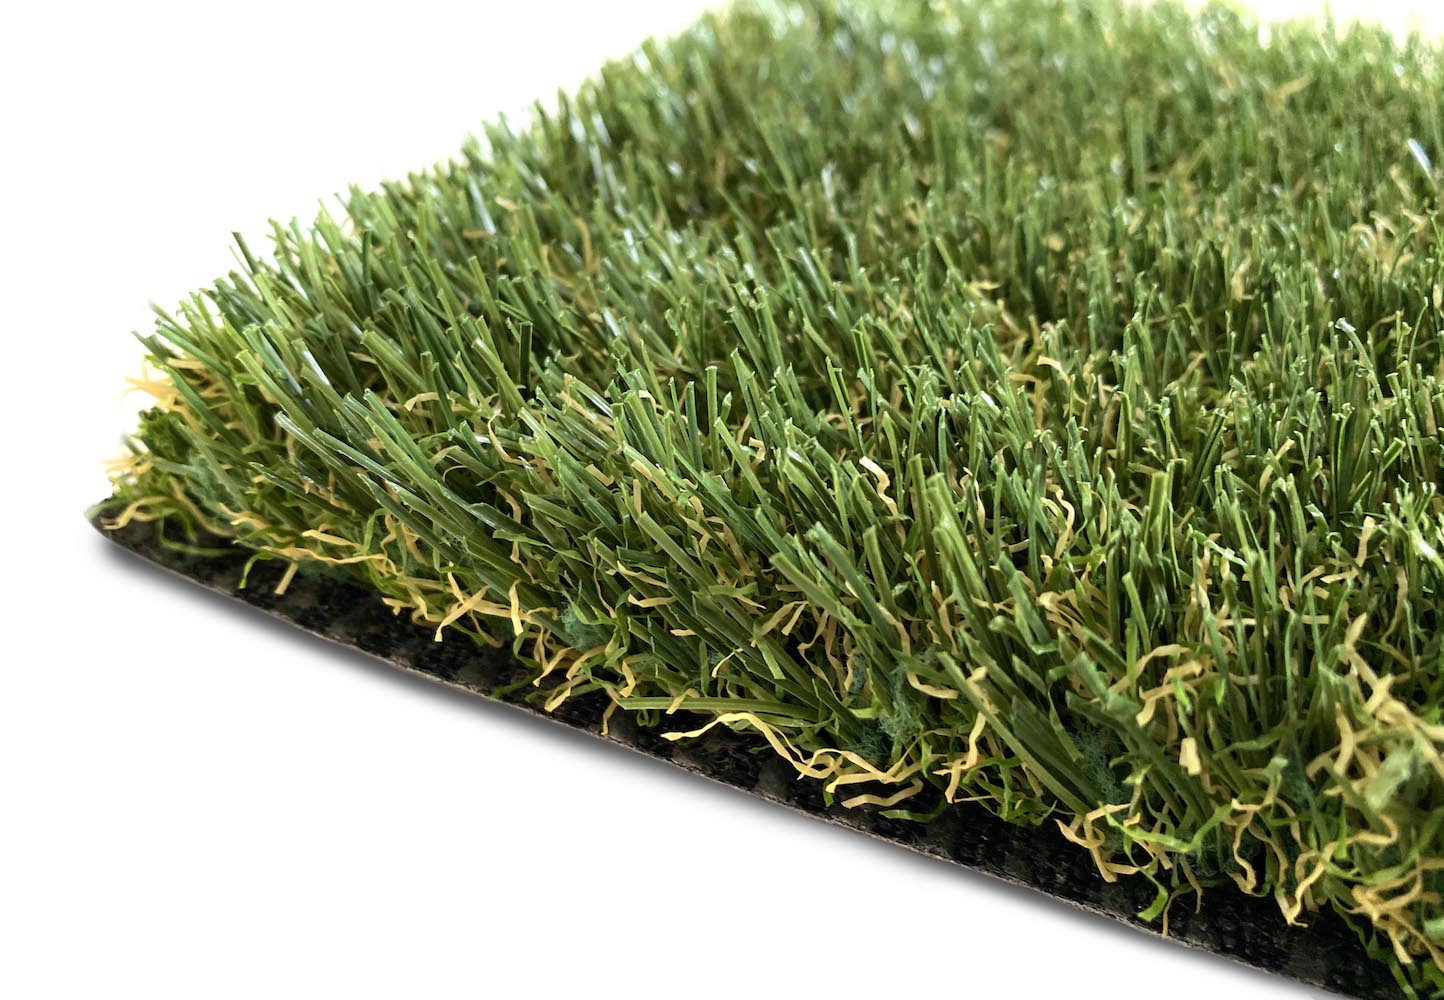 SYNLawn Cool Plus Synthetic Turf Commercial 35mm - Online Flooring Store